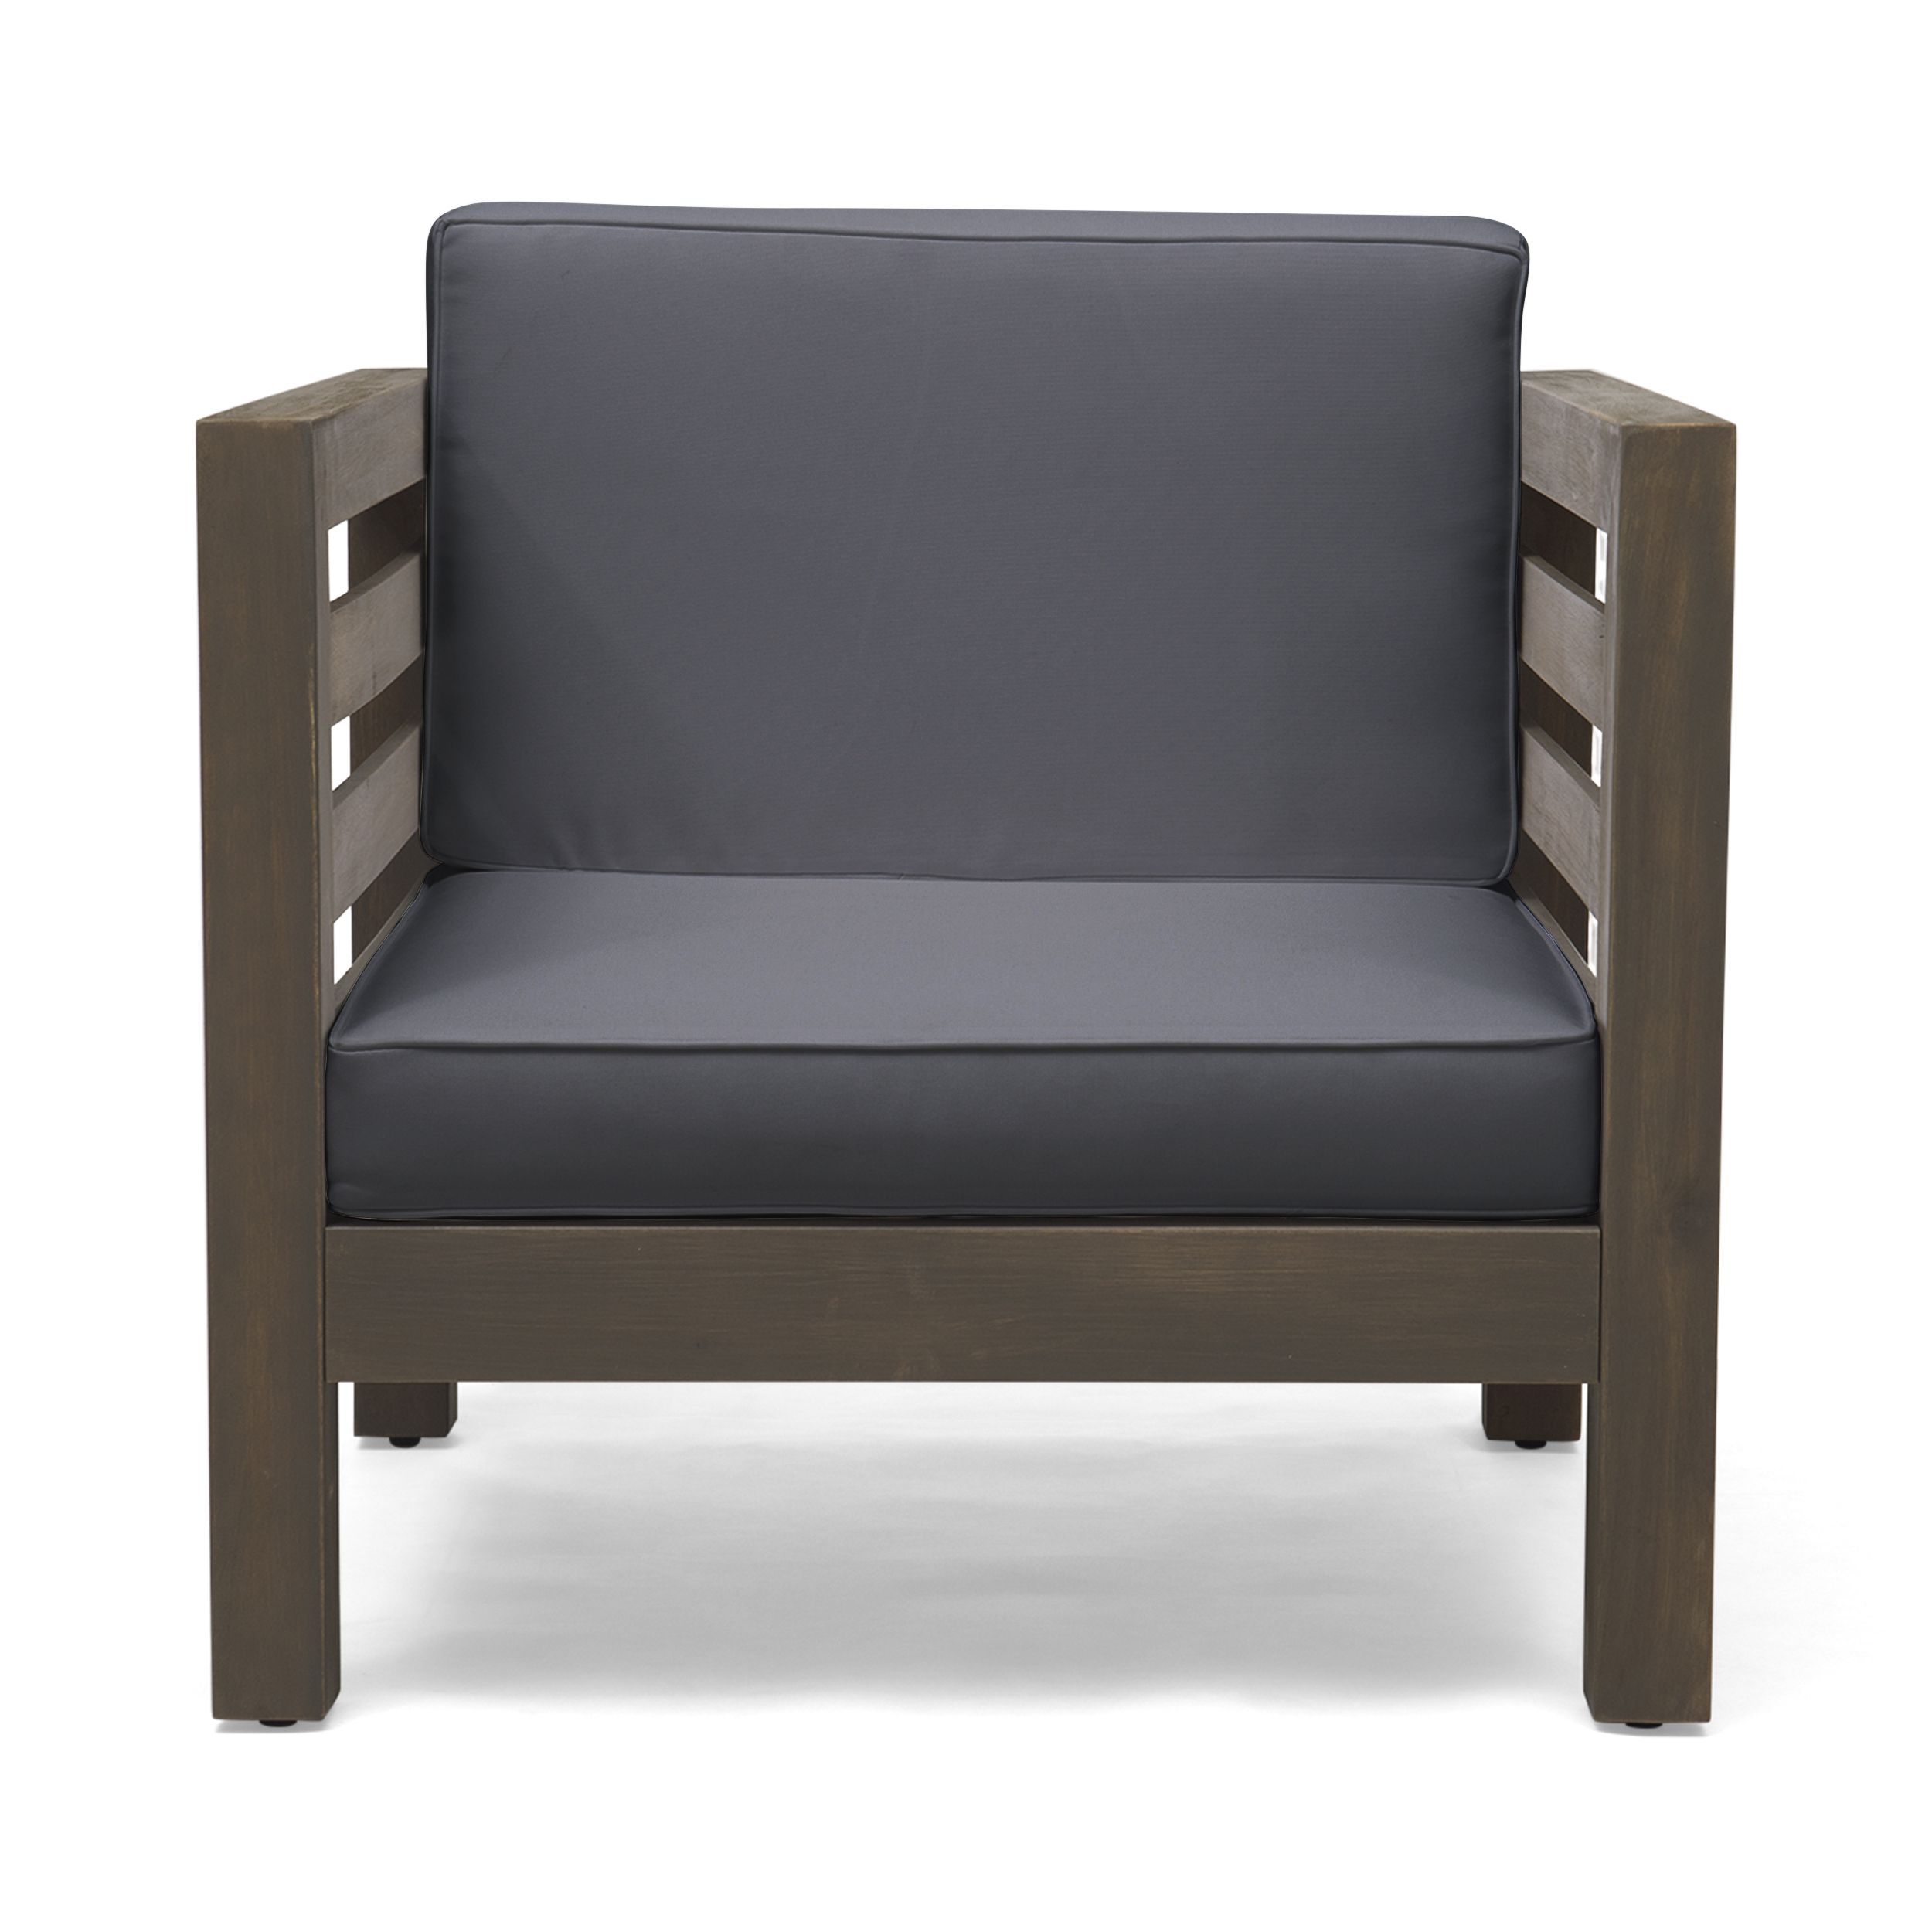 Louise Outdoor Acacia Wood Club Chair With Cushion, Gray Finish And In Well Liked Dark Wood Outdoor Chairs (View 9 of 15)